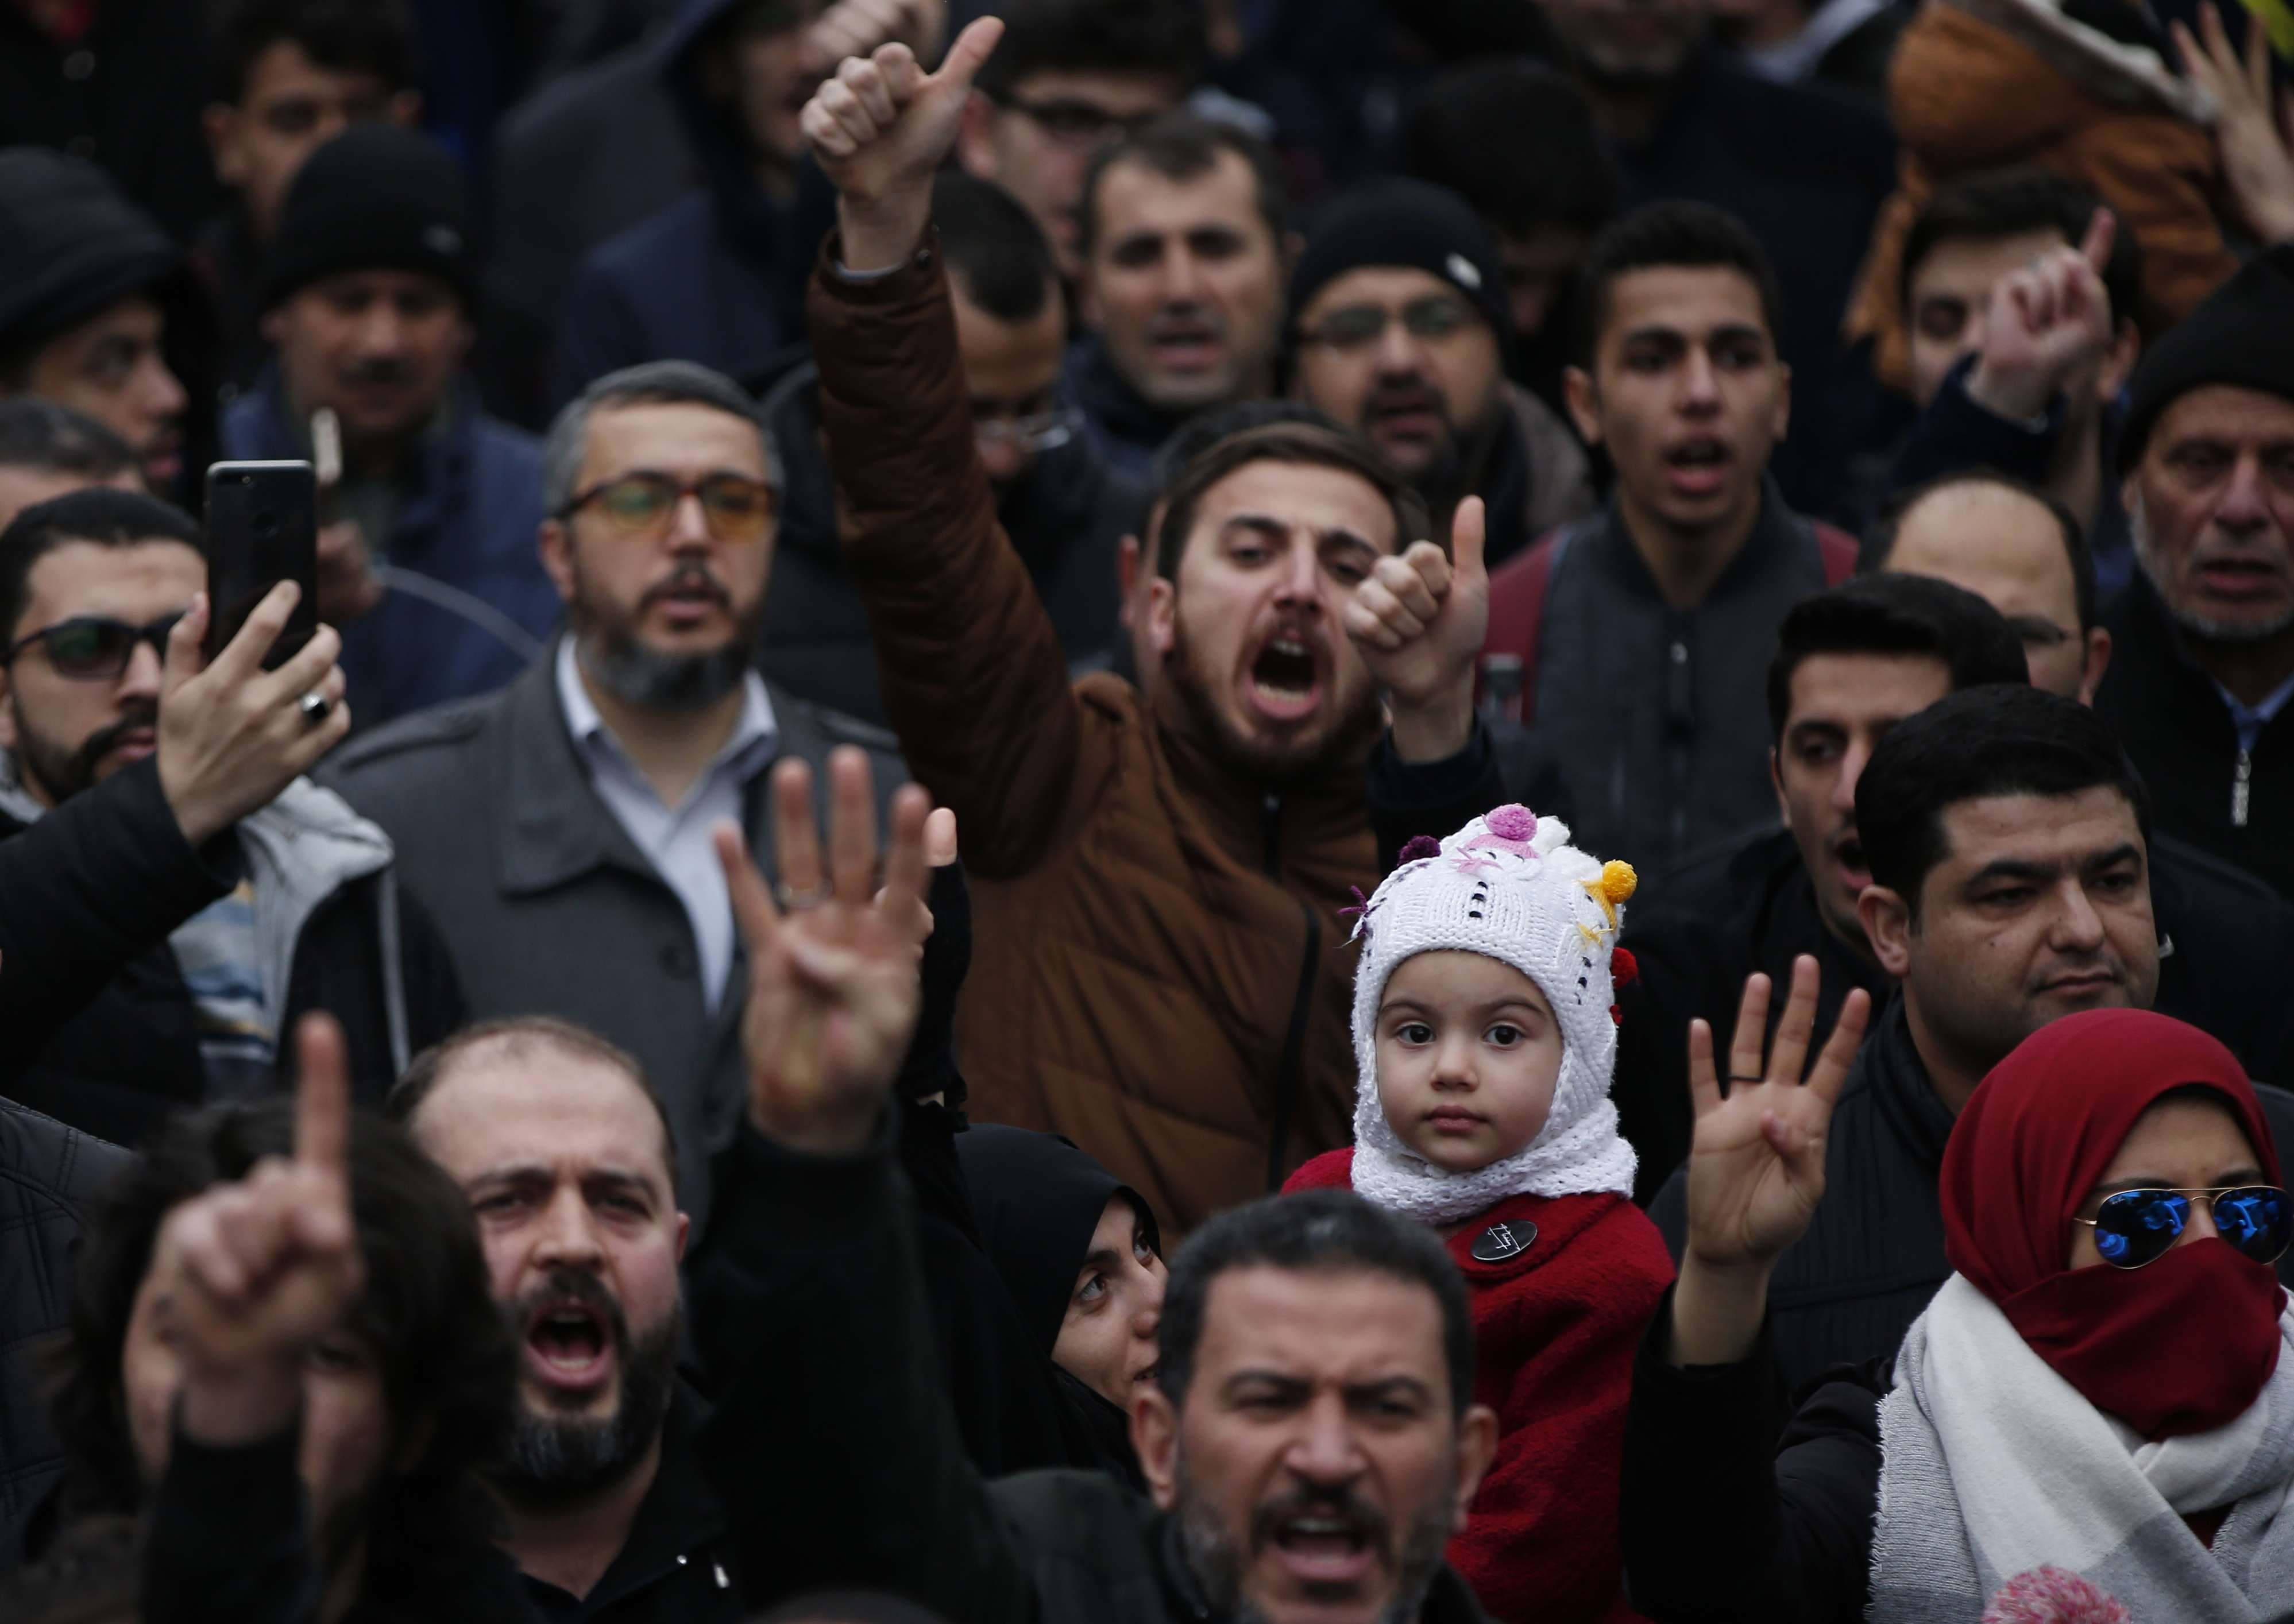 Demonstrators in Istanbul, Turkey chant slogans during a protest against the execution in Egypt of nine suspected Muslim Brotherhood members on March 2, 2019